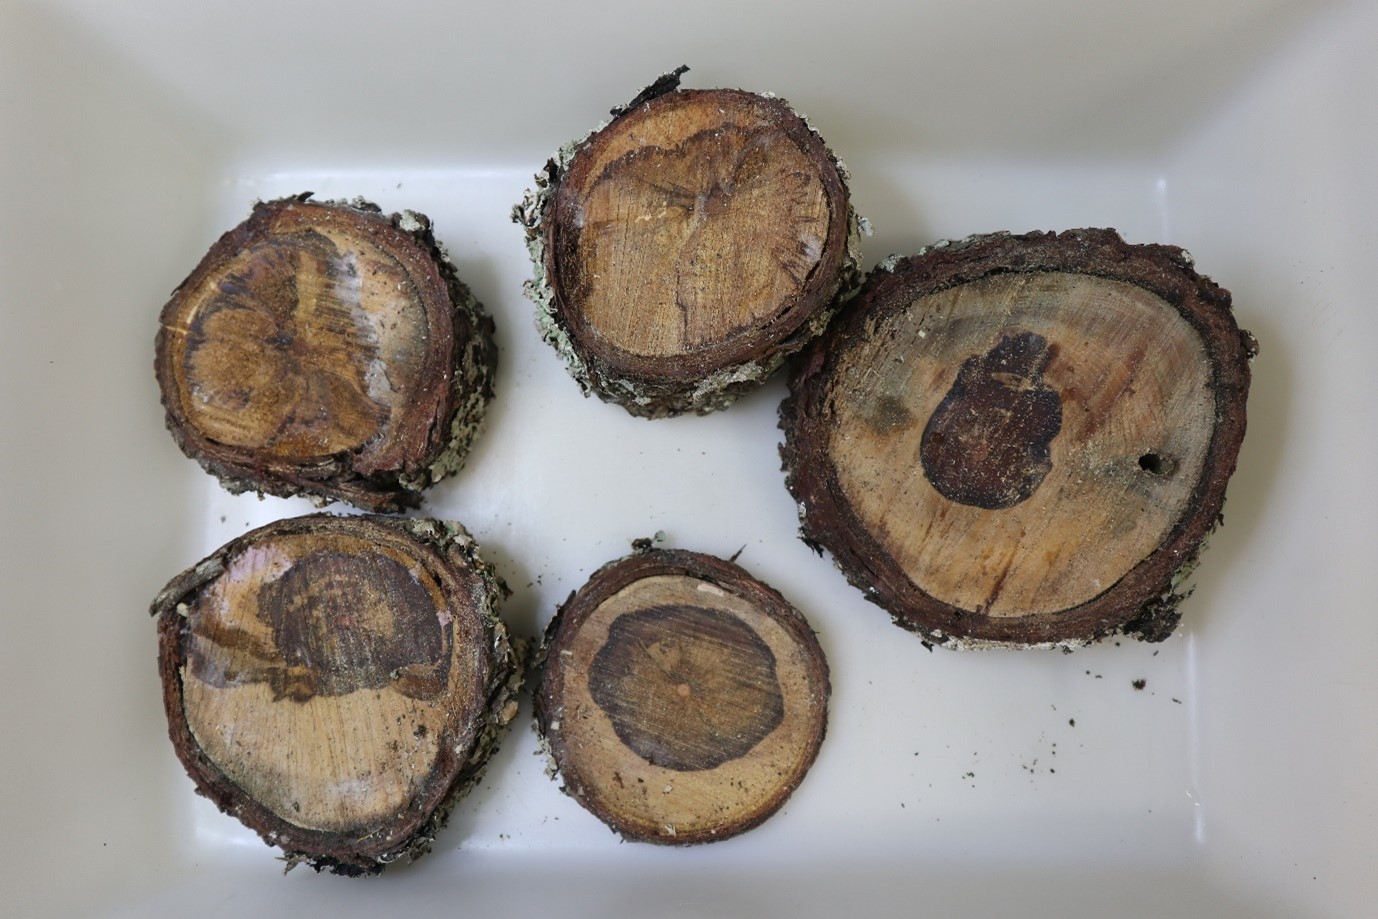 Five cross sections of a tree showing fungal growth lying flat in plastic container